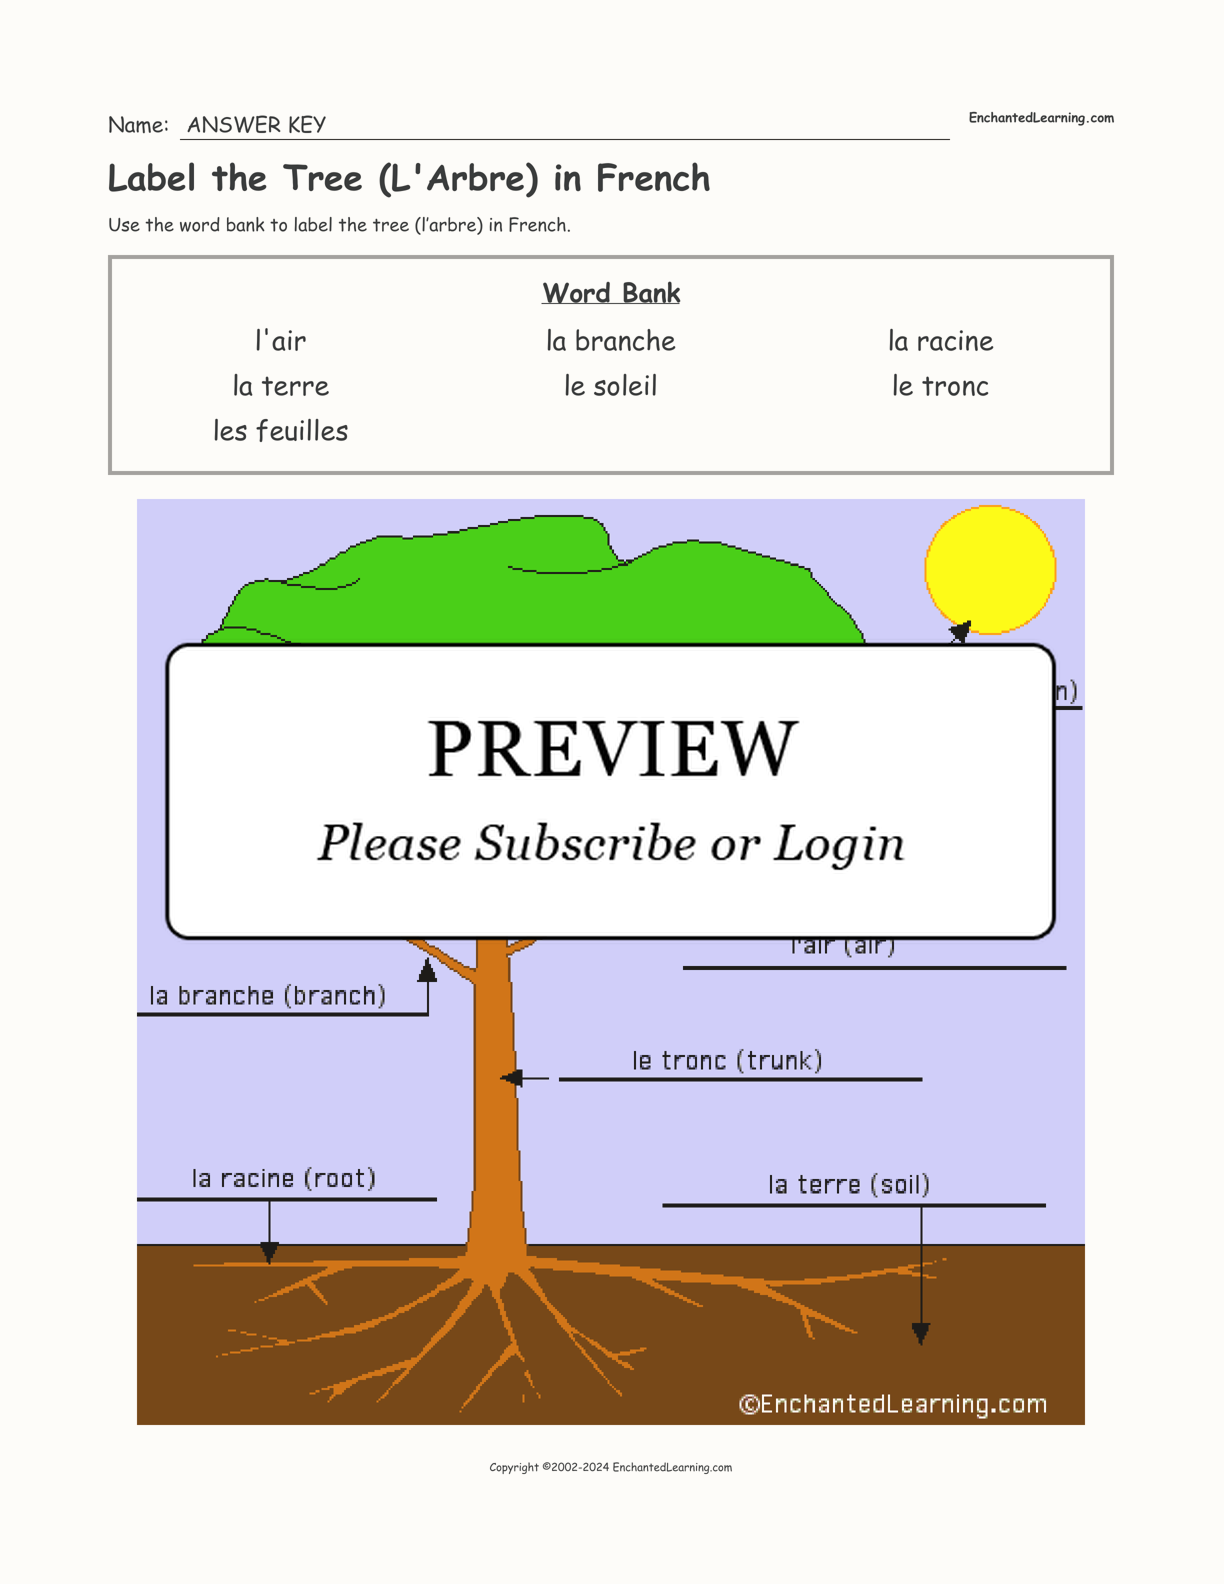 Label the Tree (L'Arbre) in French interactive worksheet page 2